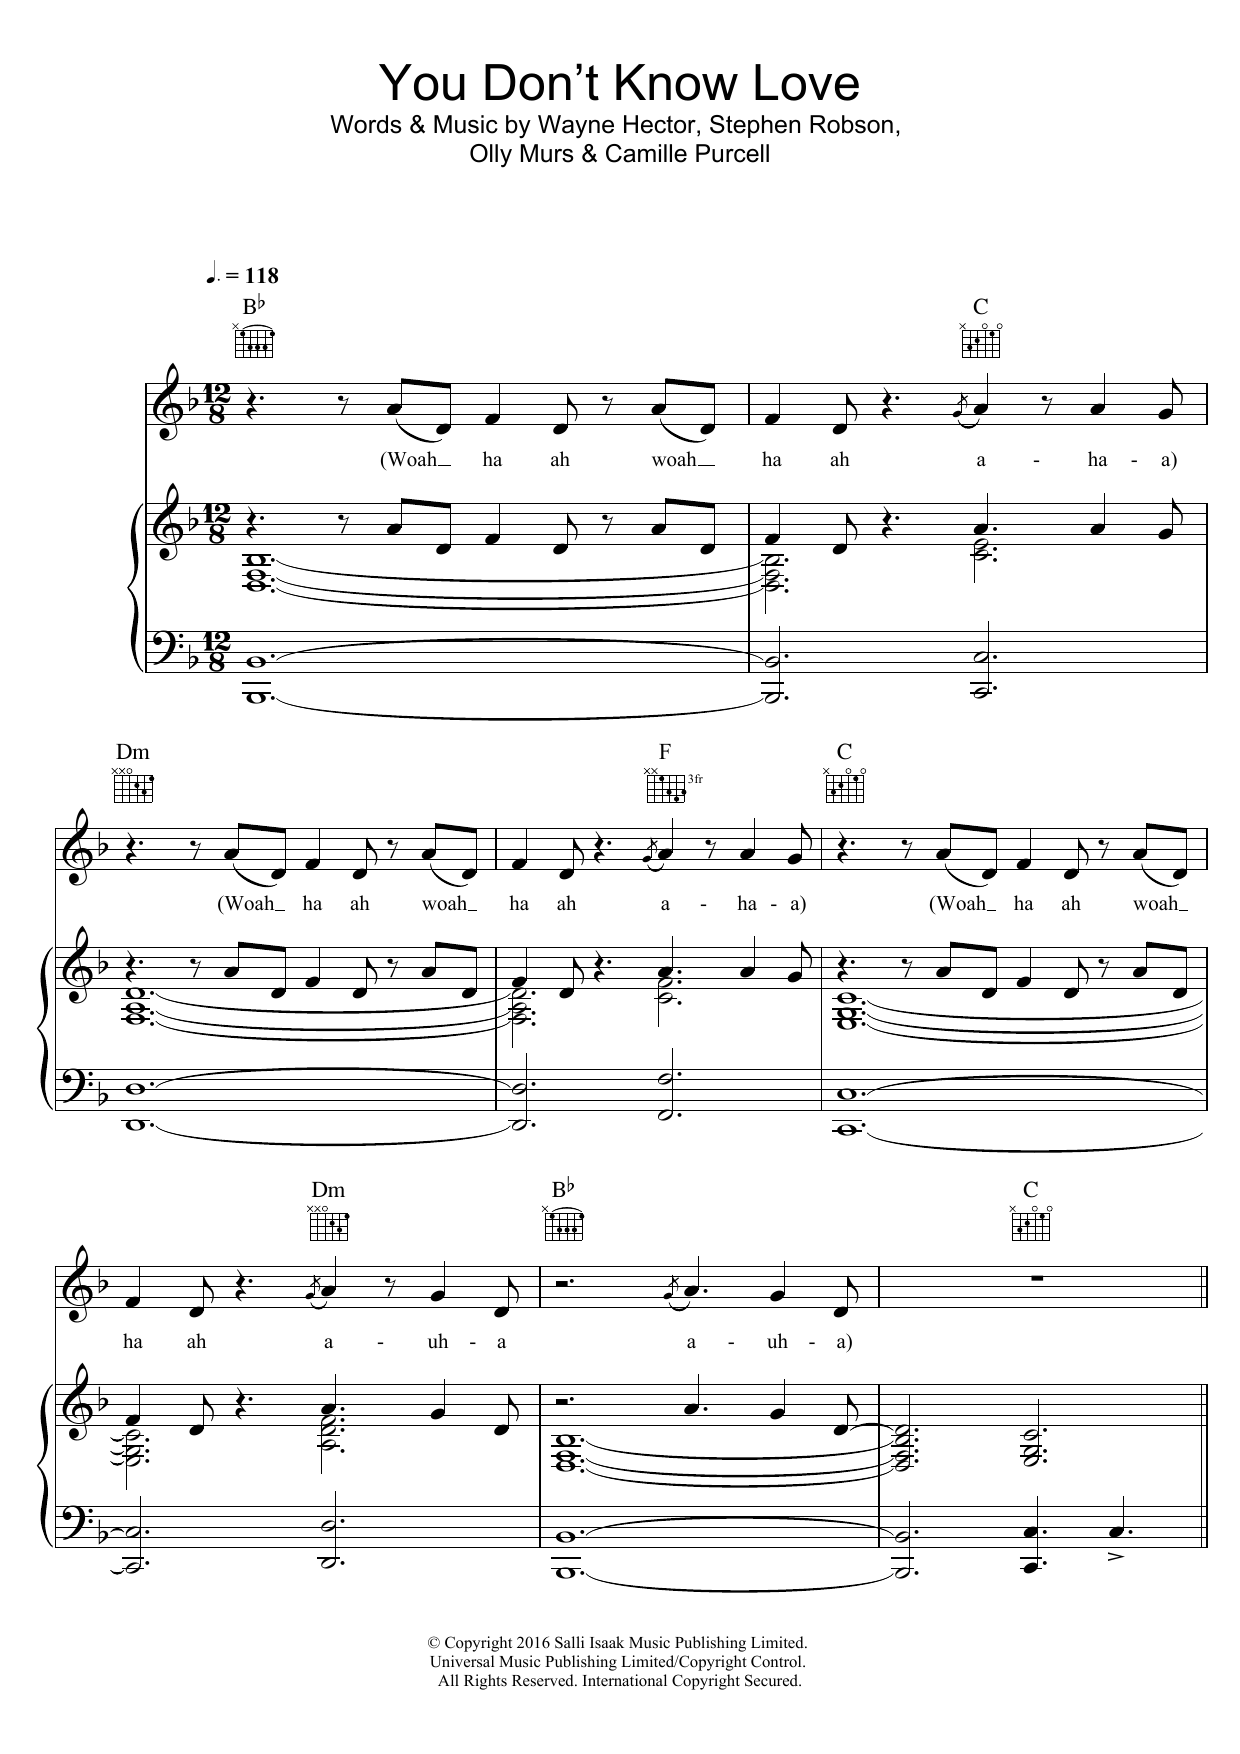 Download Olly Murs You Don't Know Love Sheet Music